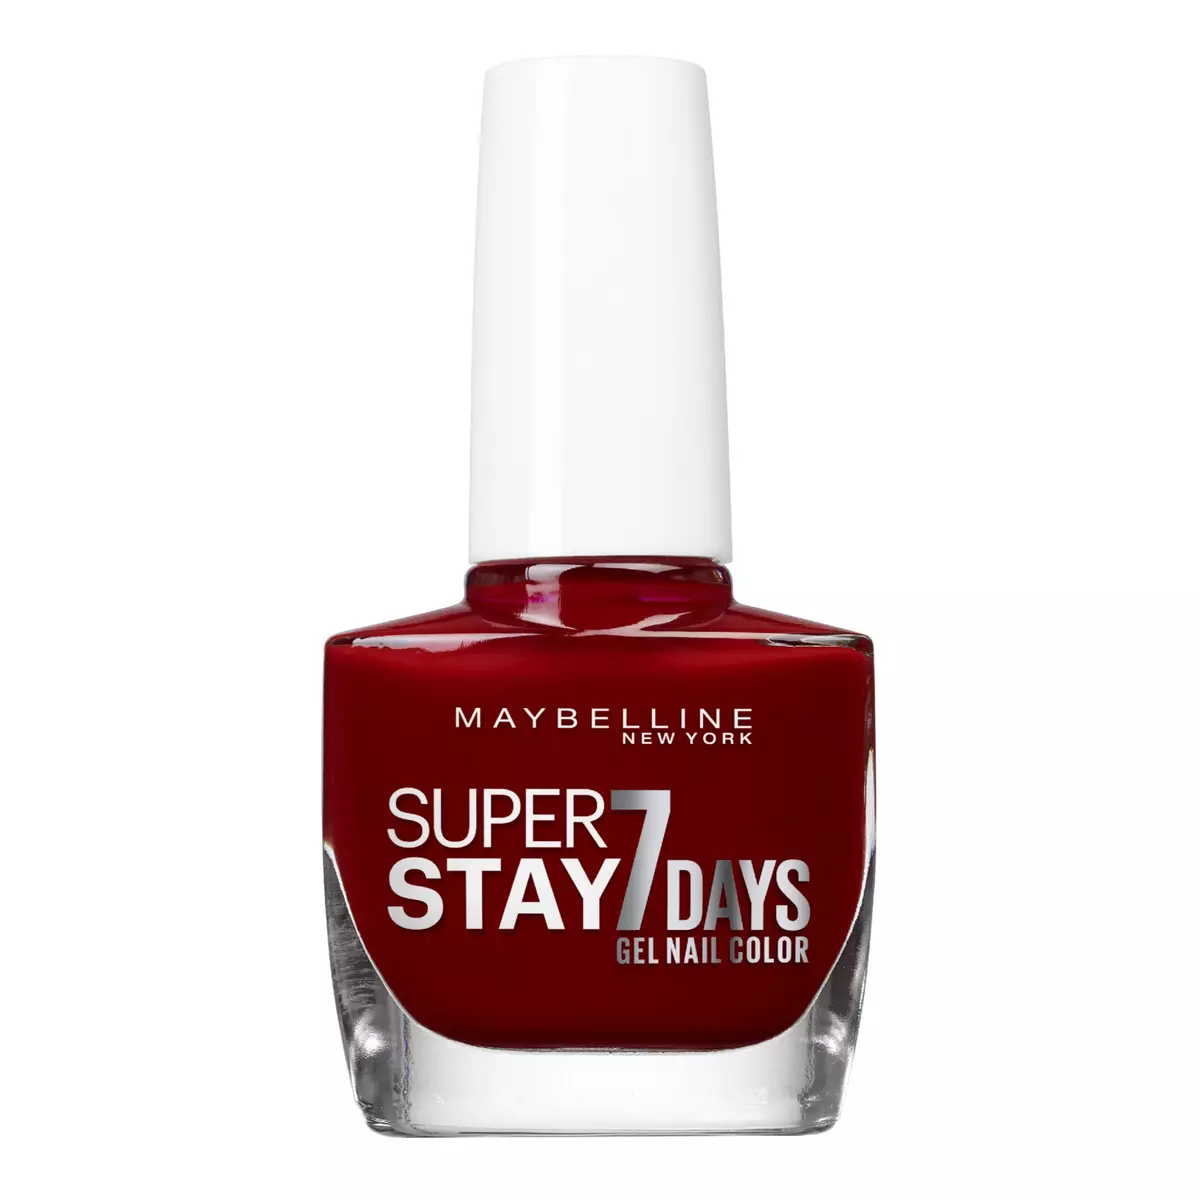 GEMEY MAYBELLINE Super stay 7 days vernis à ongles n°501 rouge laqué 10ml